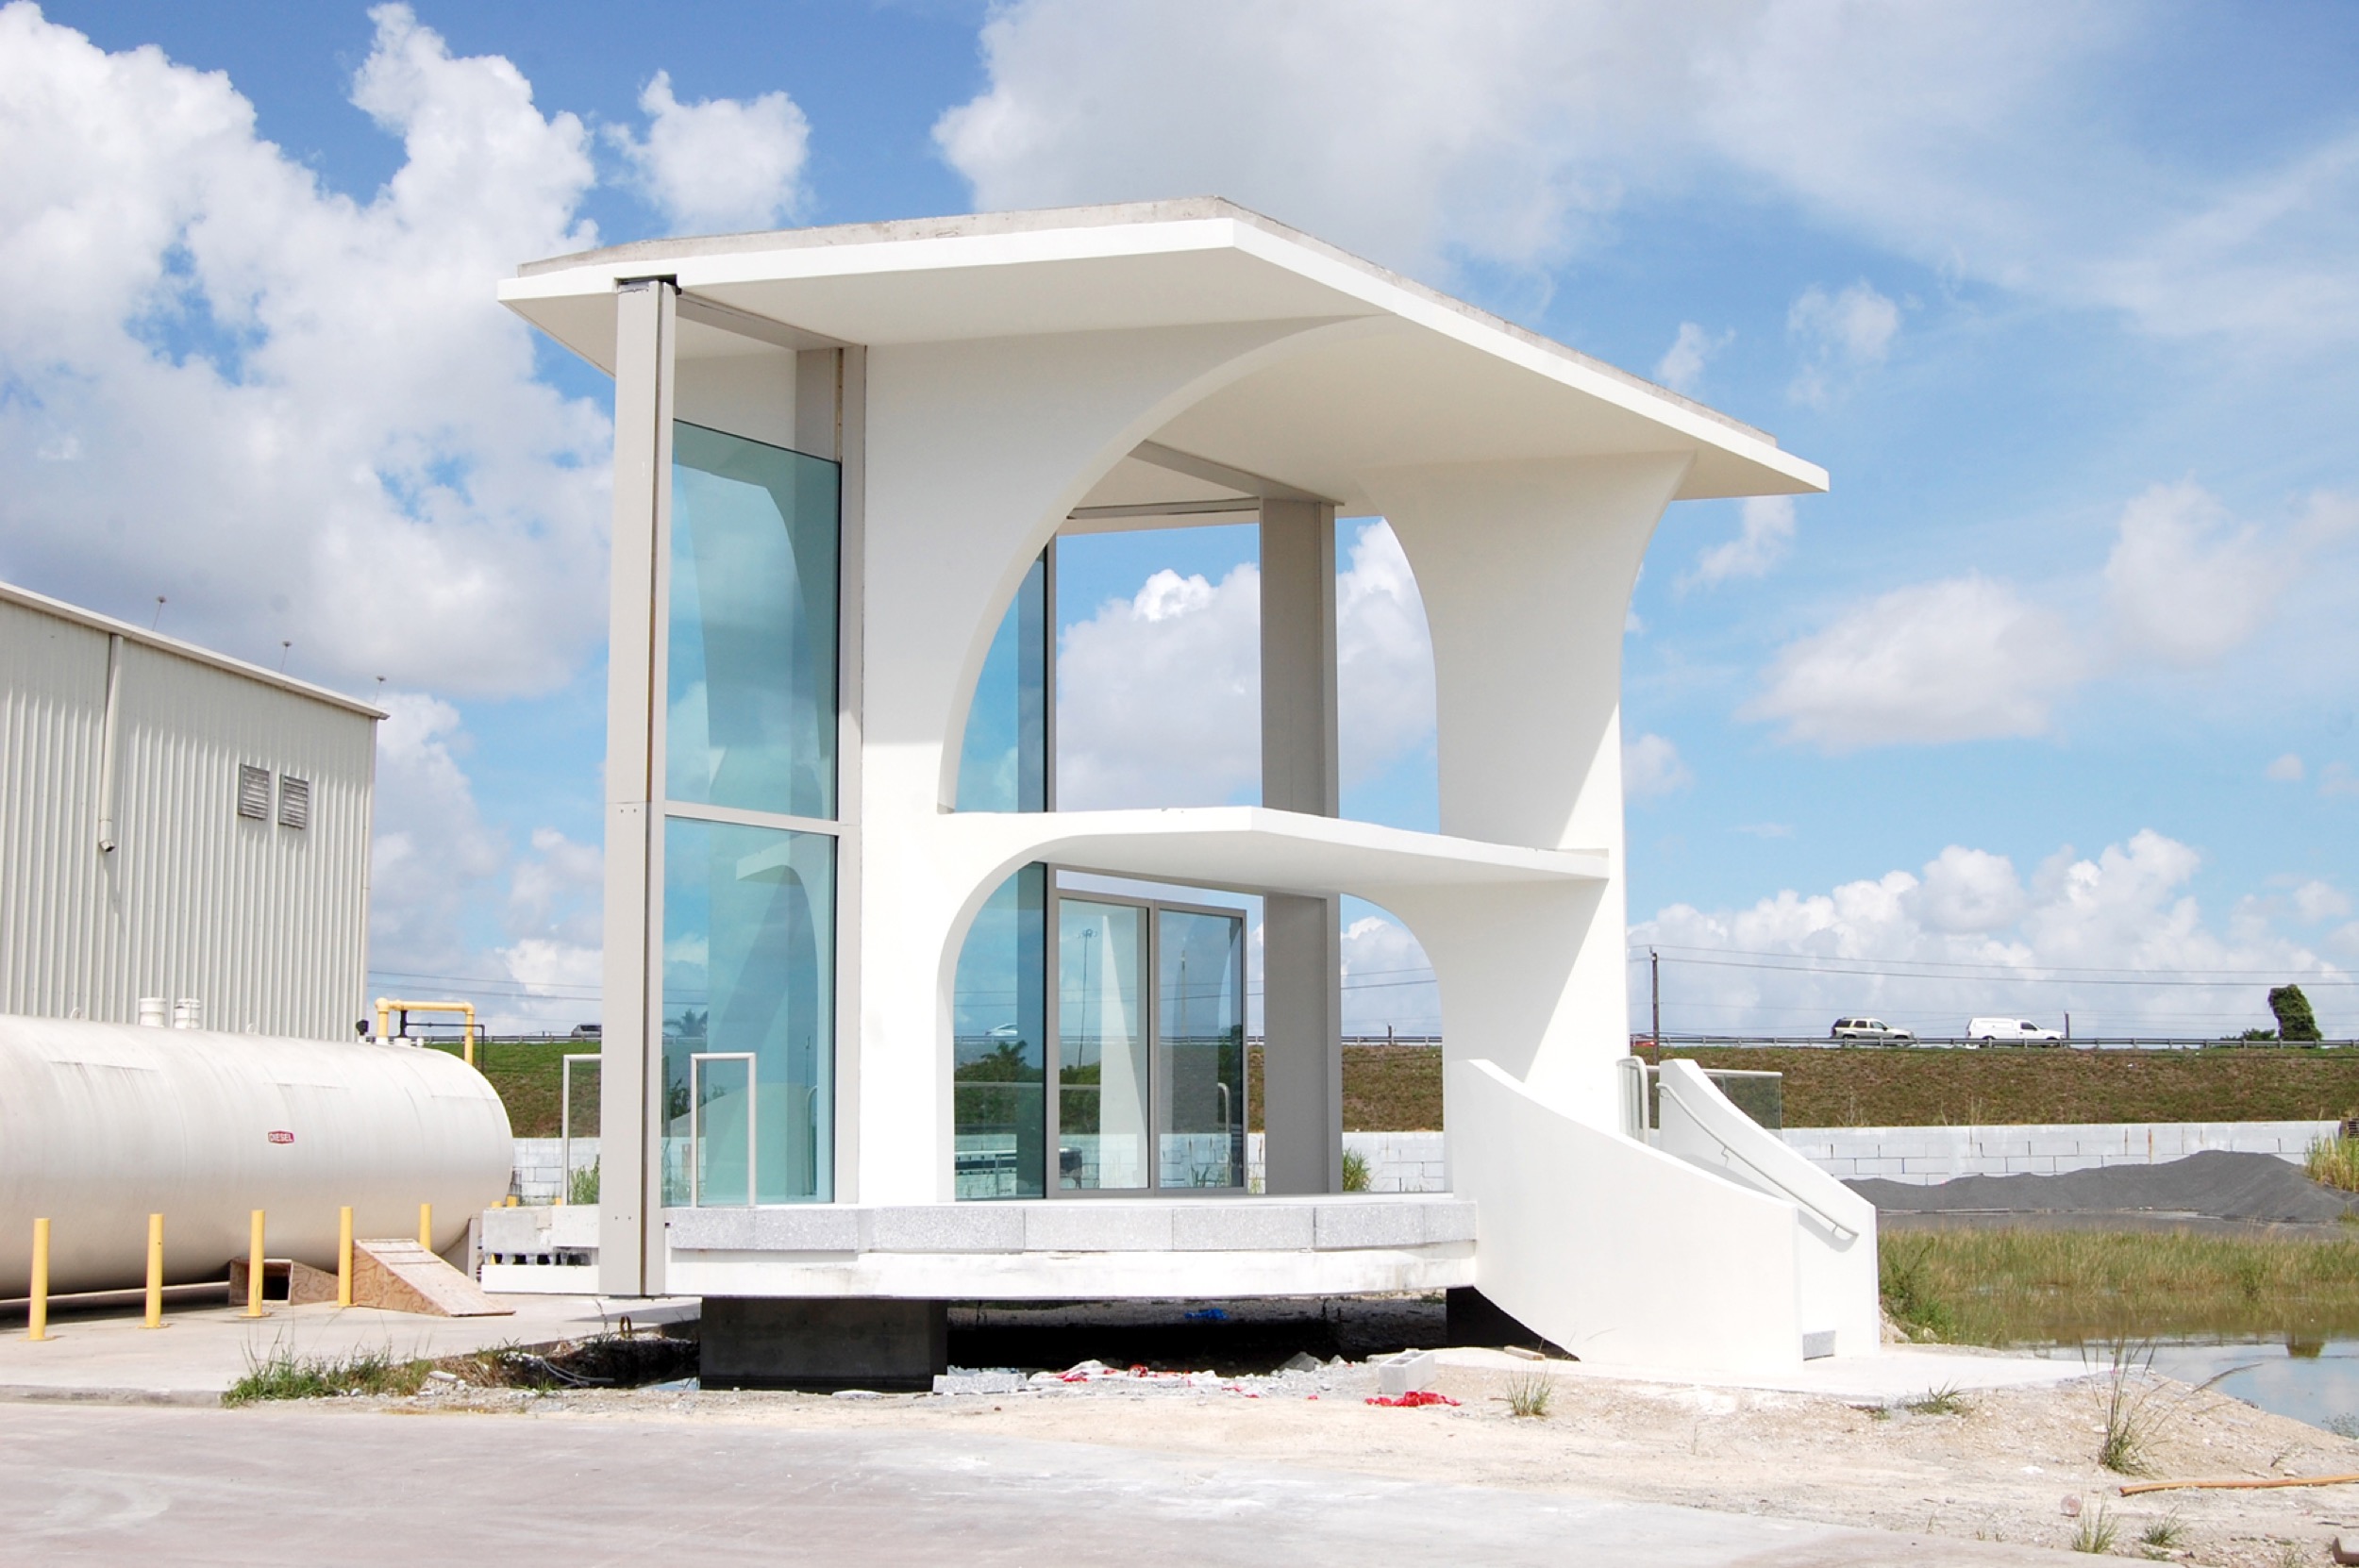 The Full-Size Architectural Mockups of Miami’s Latest Starchitect-Designed Buildings